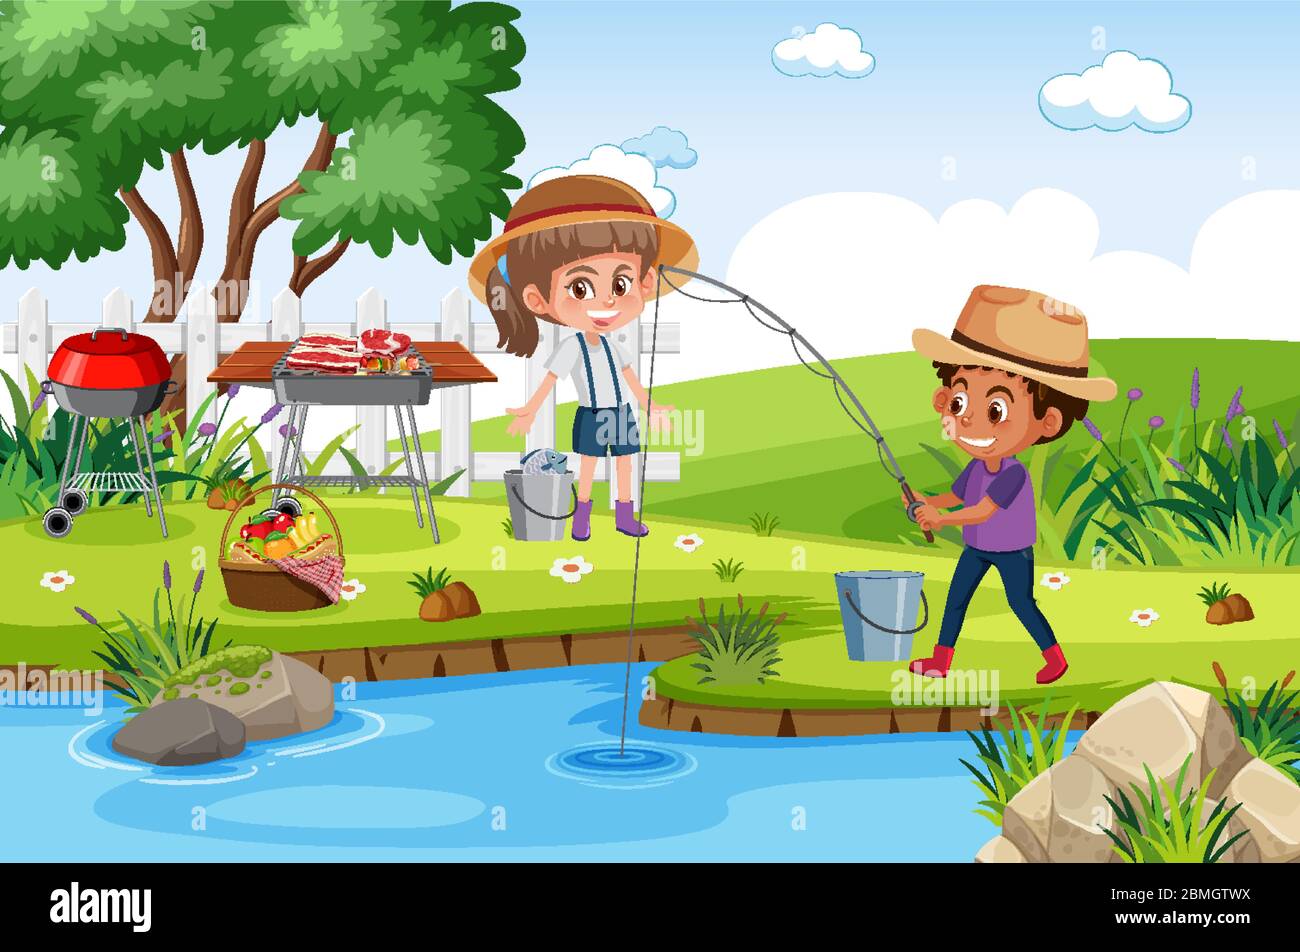 Background scene with kids fishing in the park illustration Stock